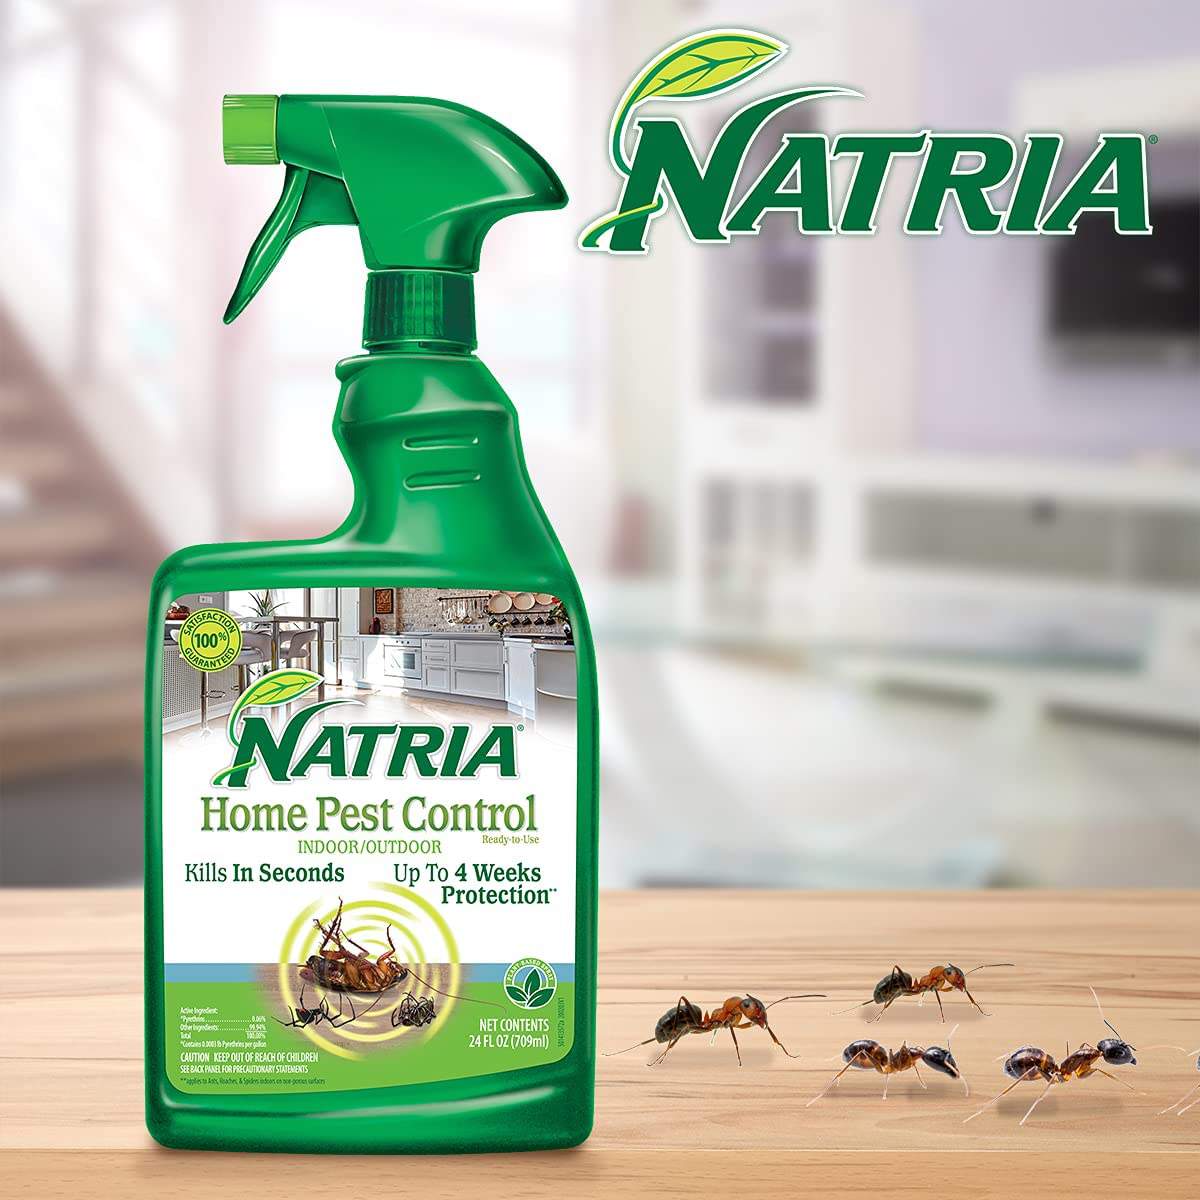 Natria 706260D Home Pest Control Bug Killer for Indoor and Outdoor, 24-Ounce, Ready-to-Use